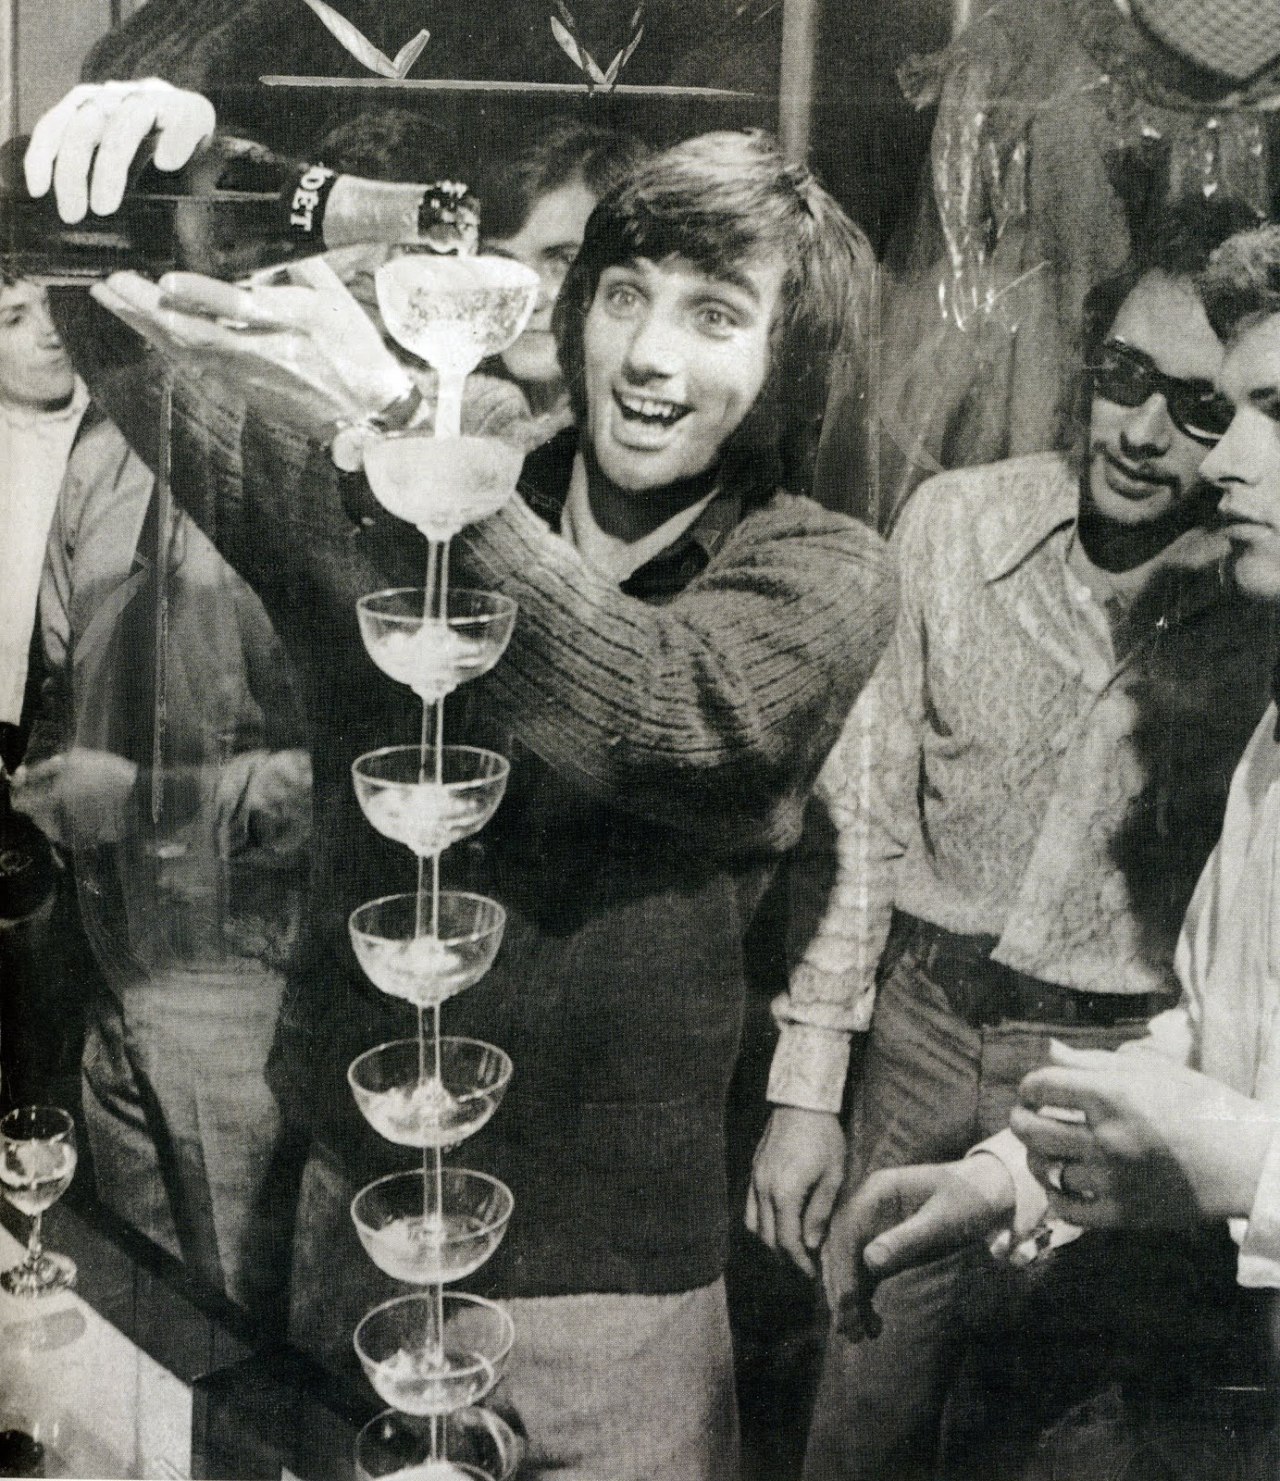 George Best filling some glasses with wine